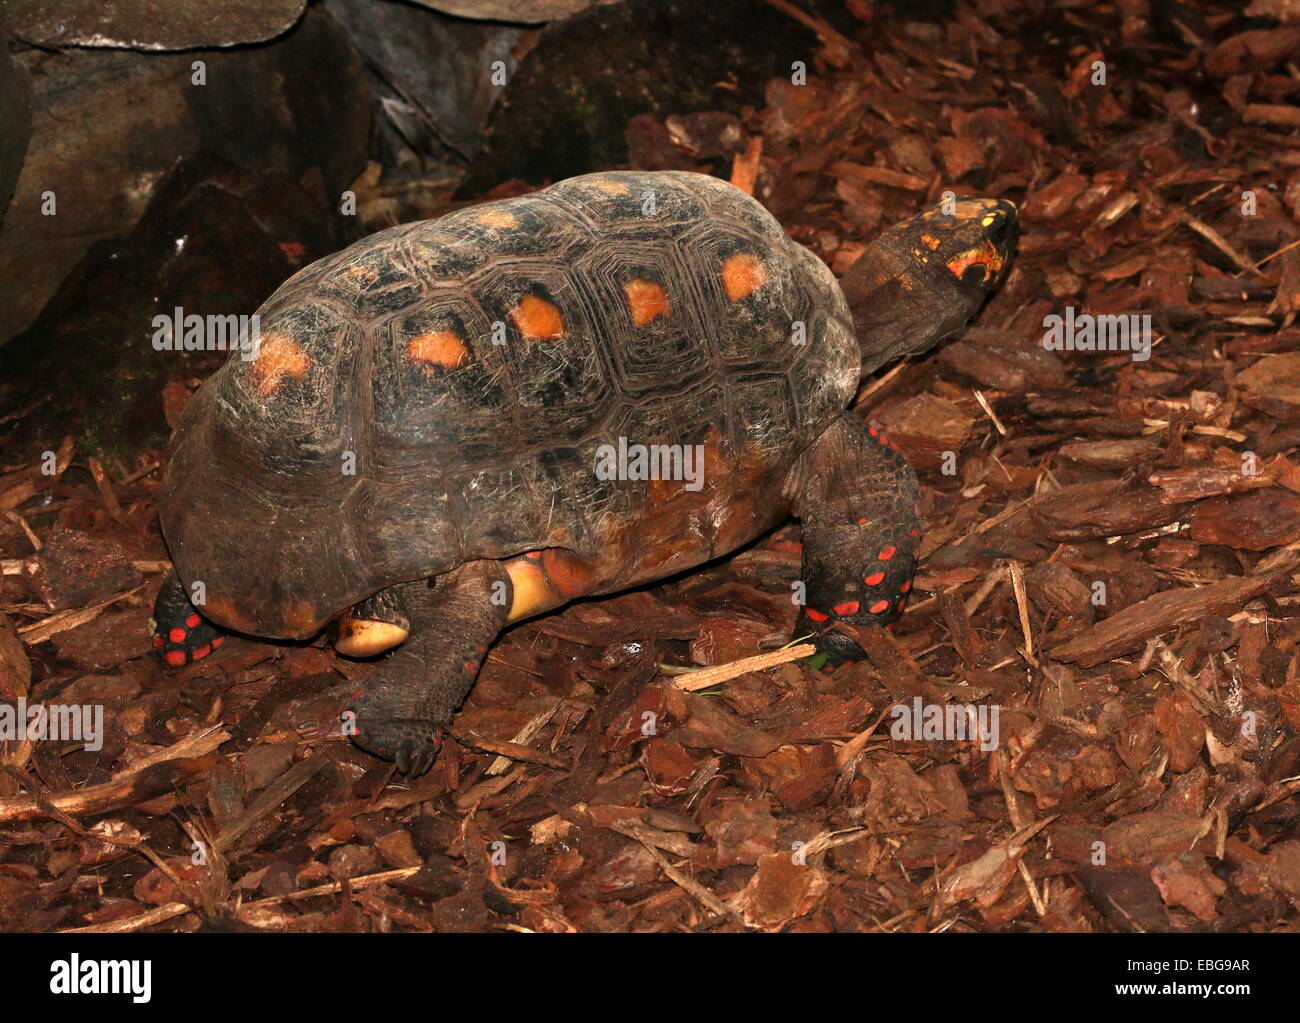 Close-up of a South American Red-footed tortoise (Chelonoidis carbonaria) Stock Photo